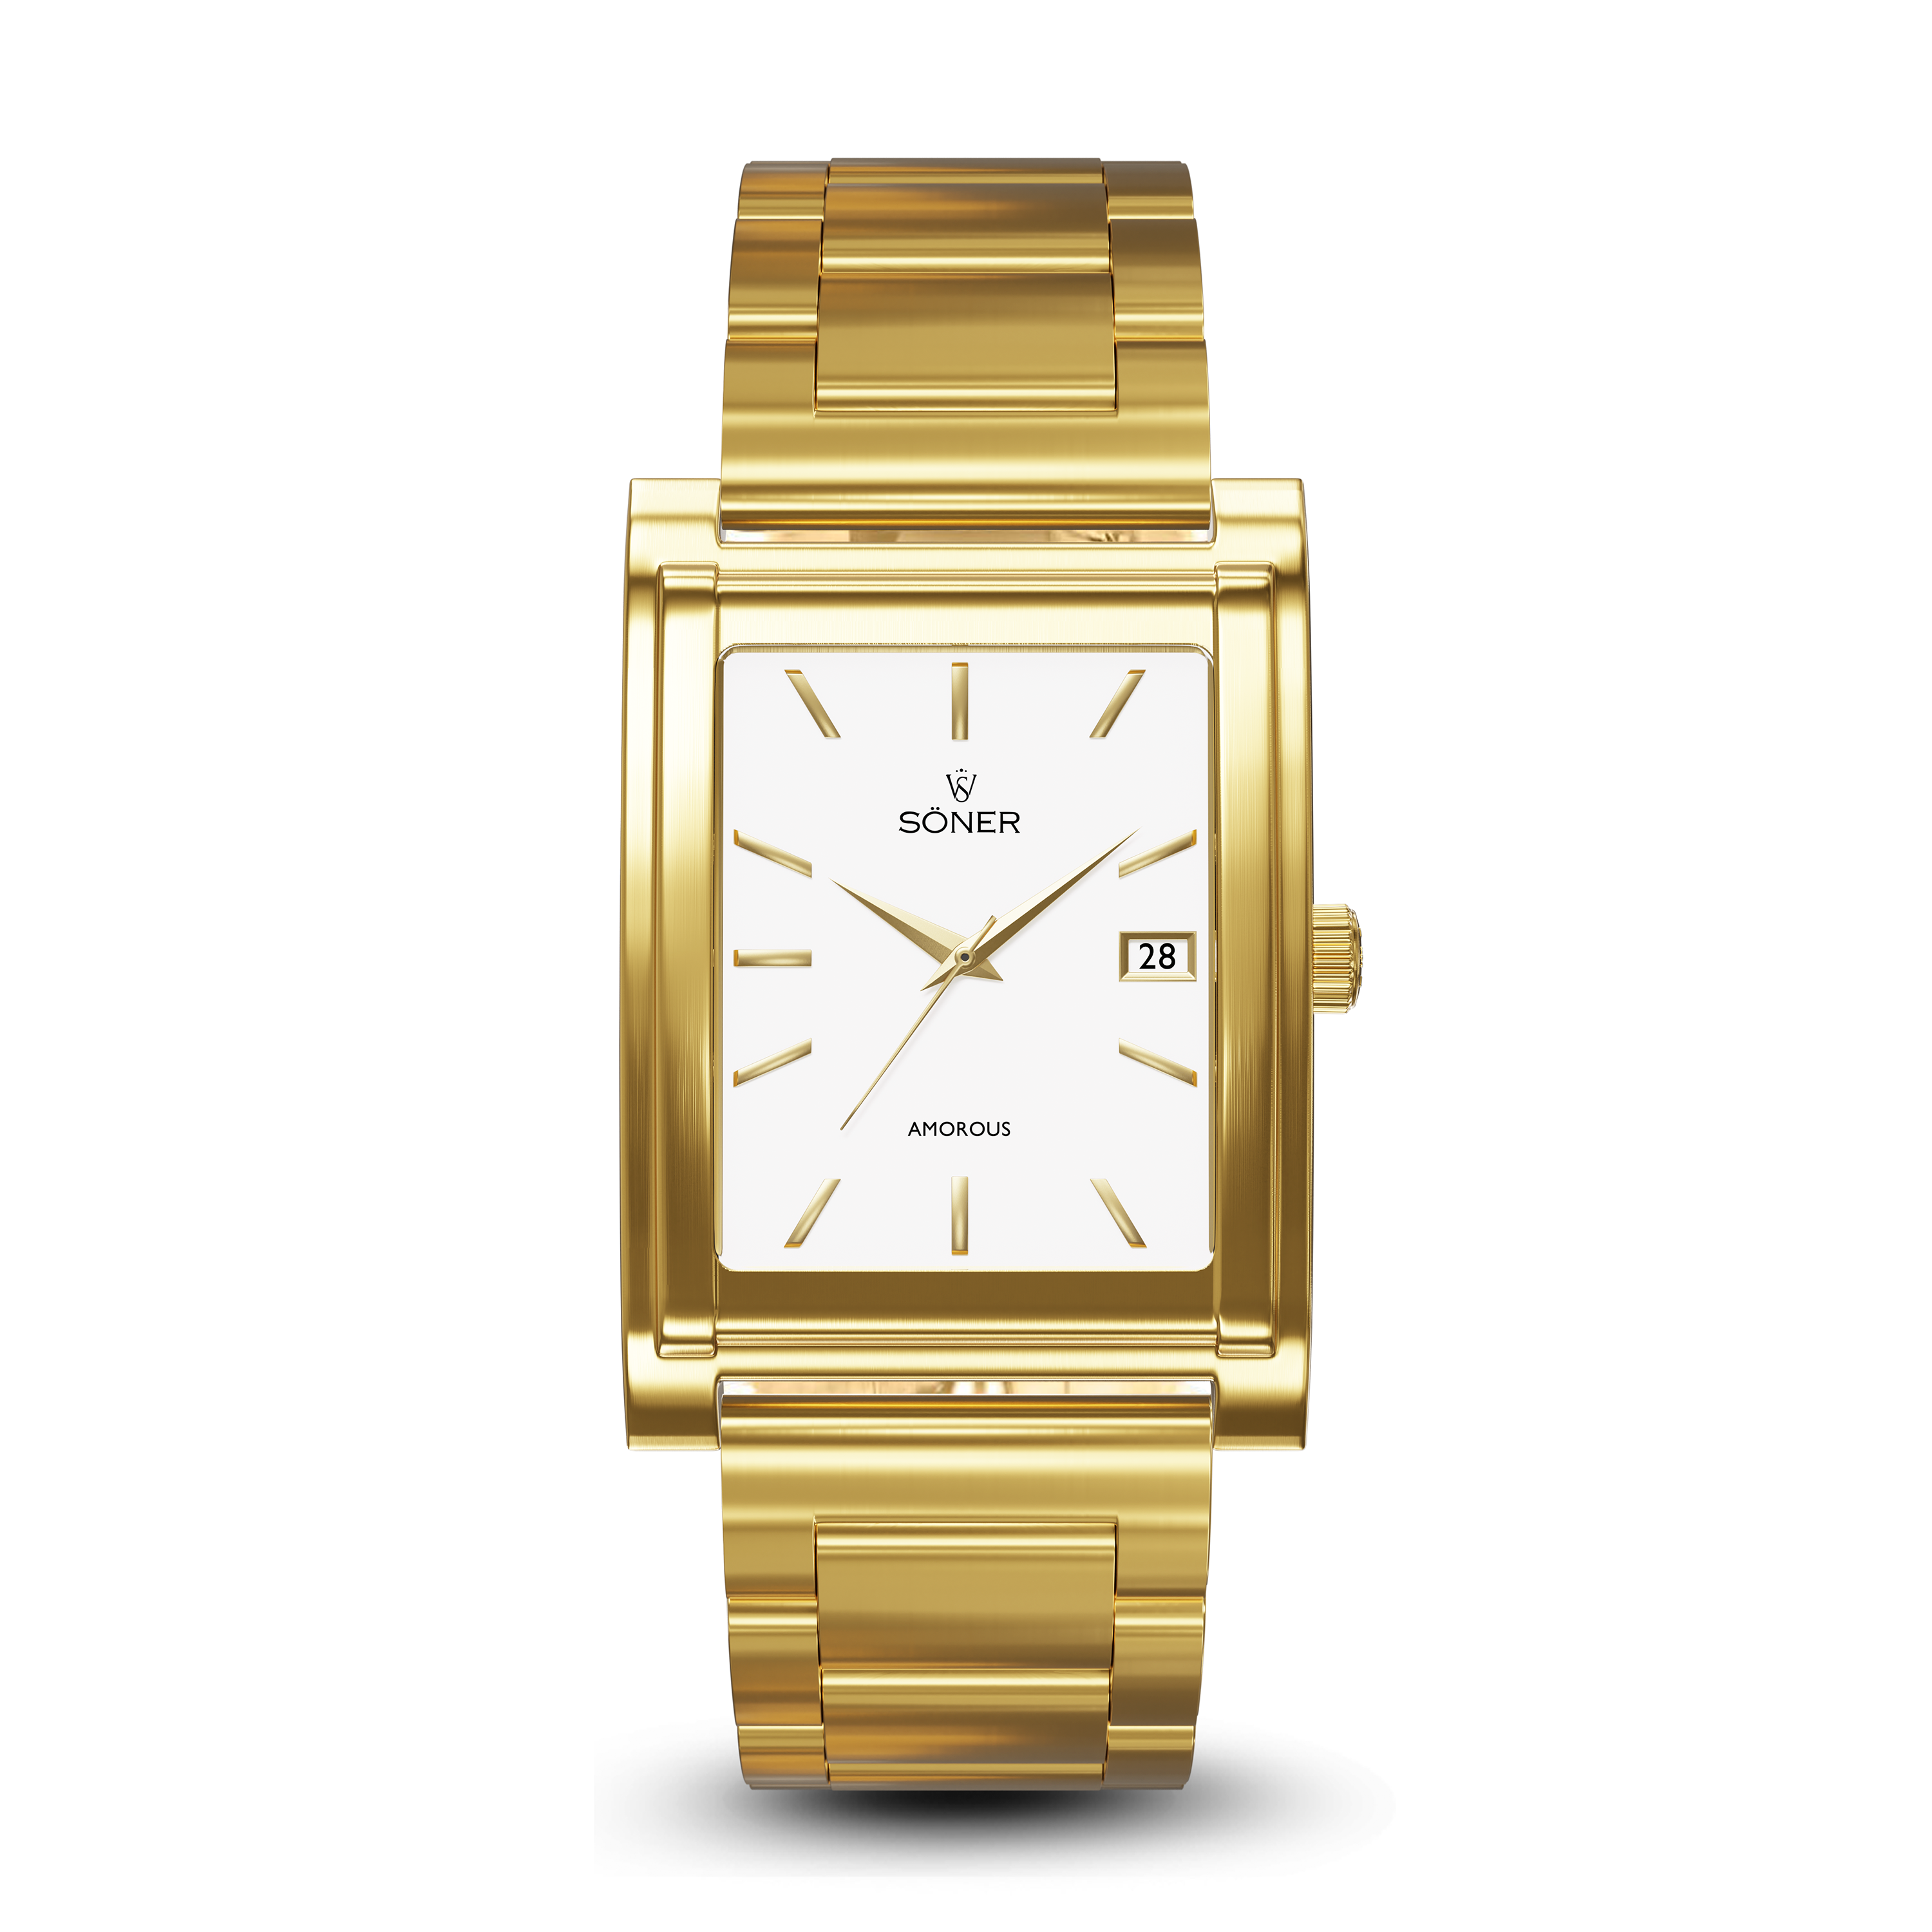 Square automatic watch, Amorous Casablanca with white dial - steel bracelet